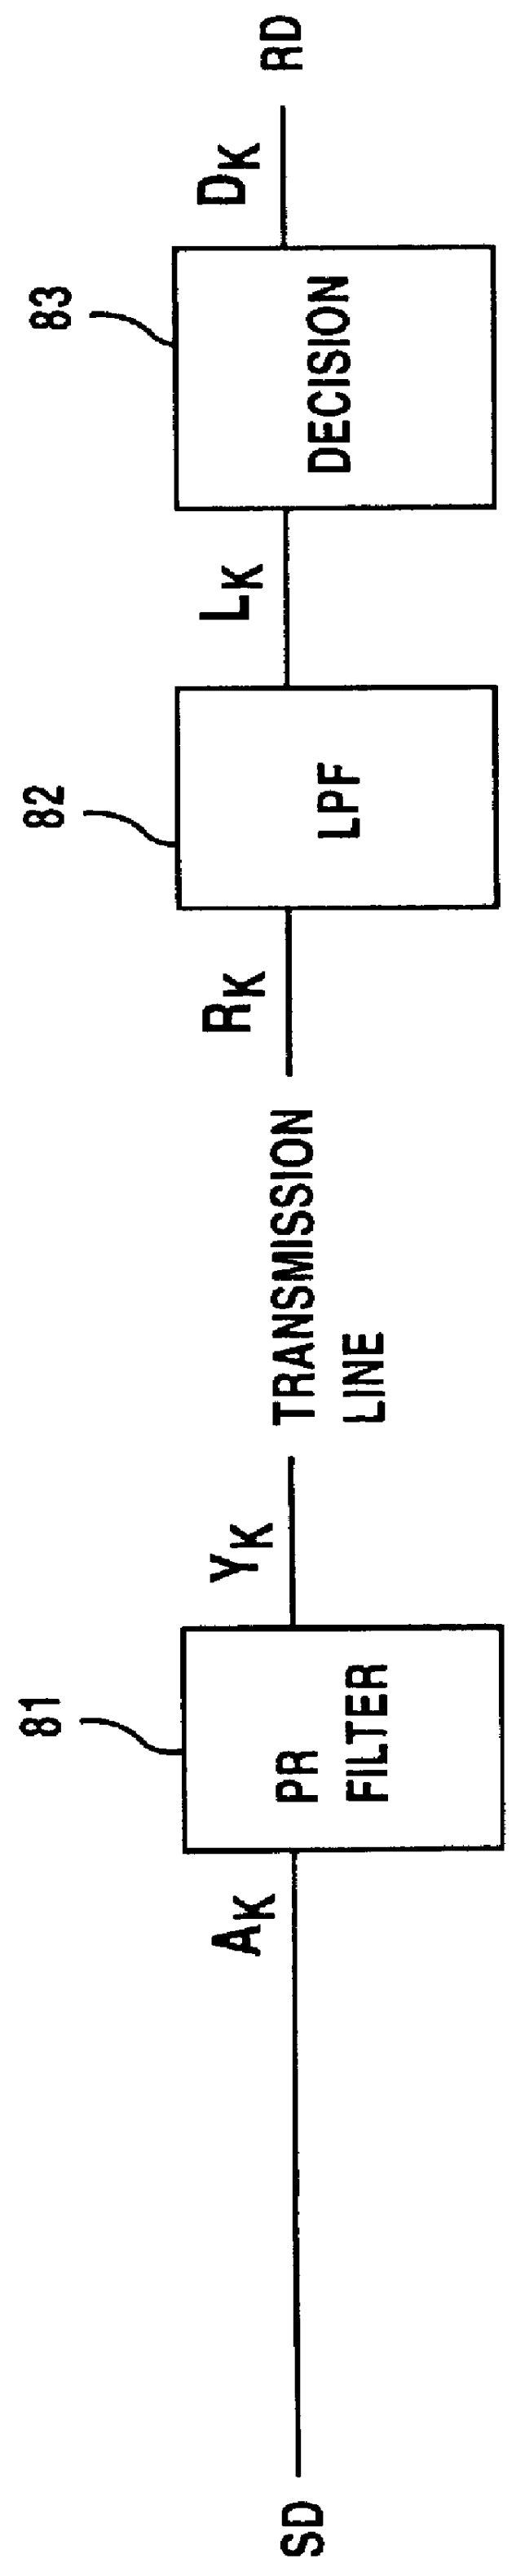 Process and system for transferring vector signal with precoding for signal power reduction